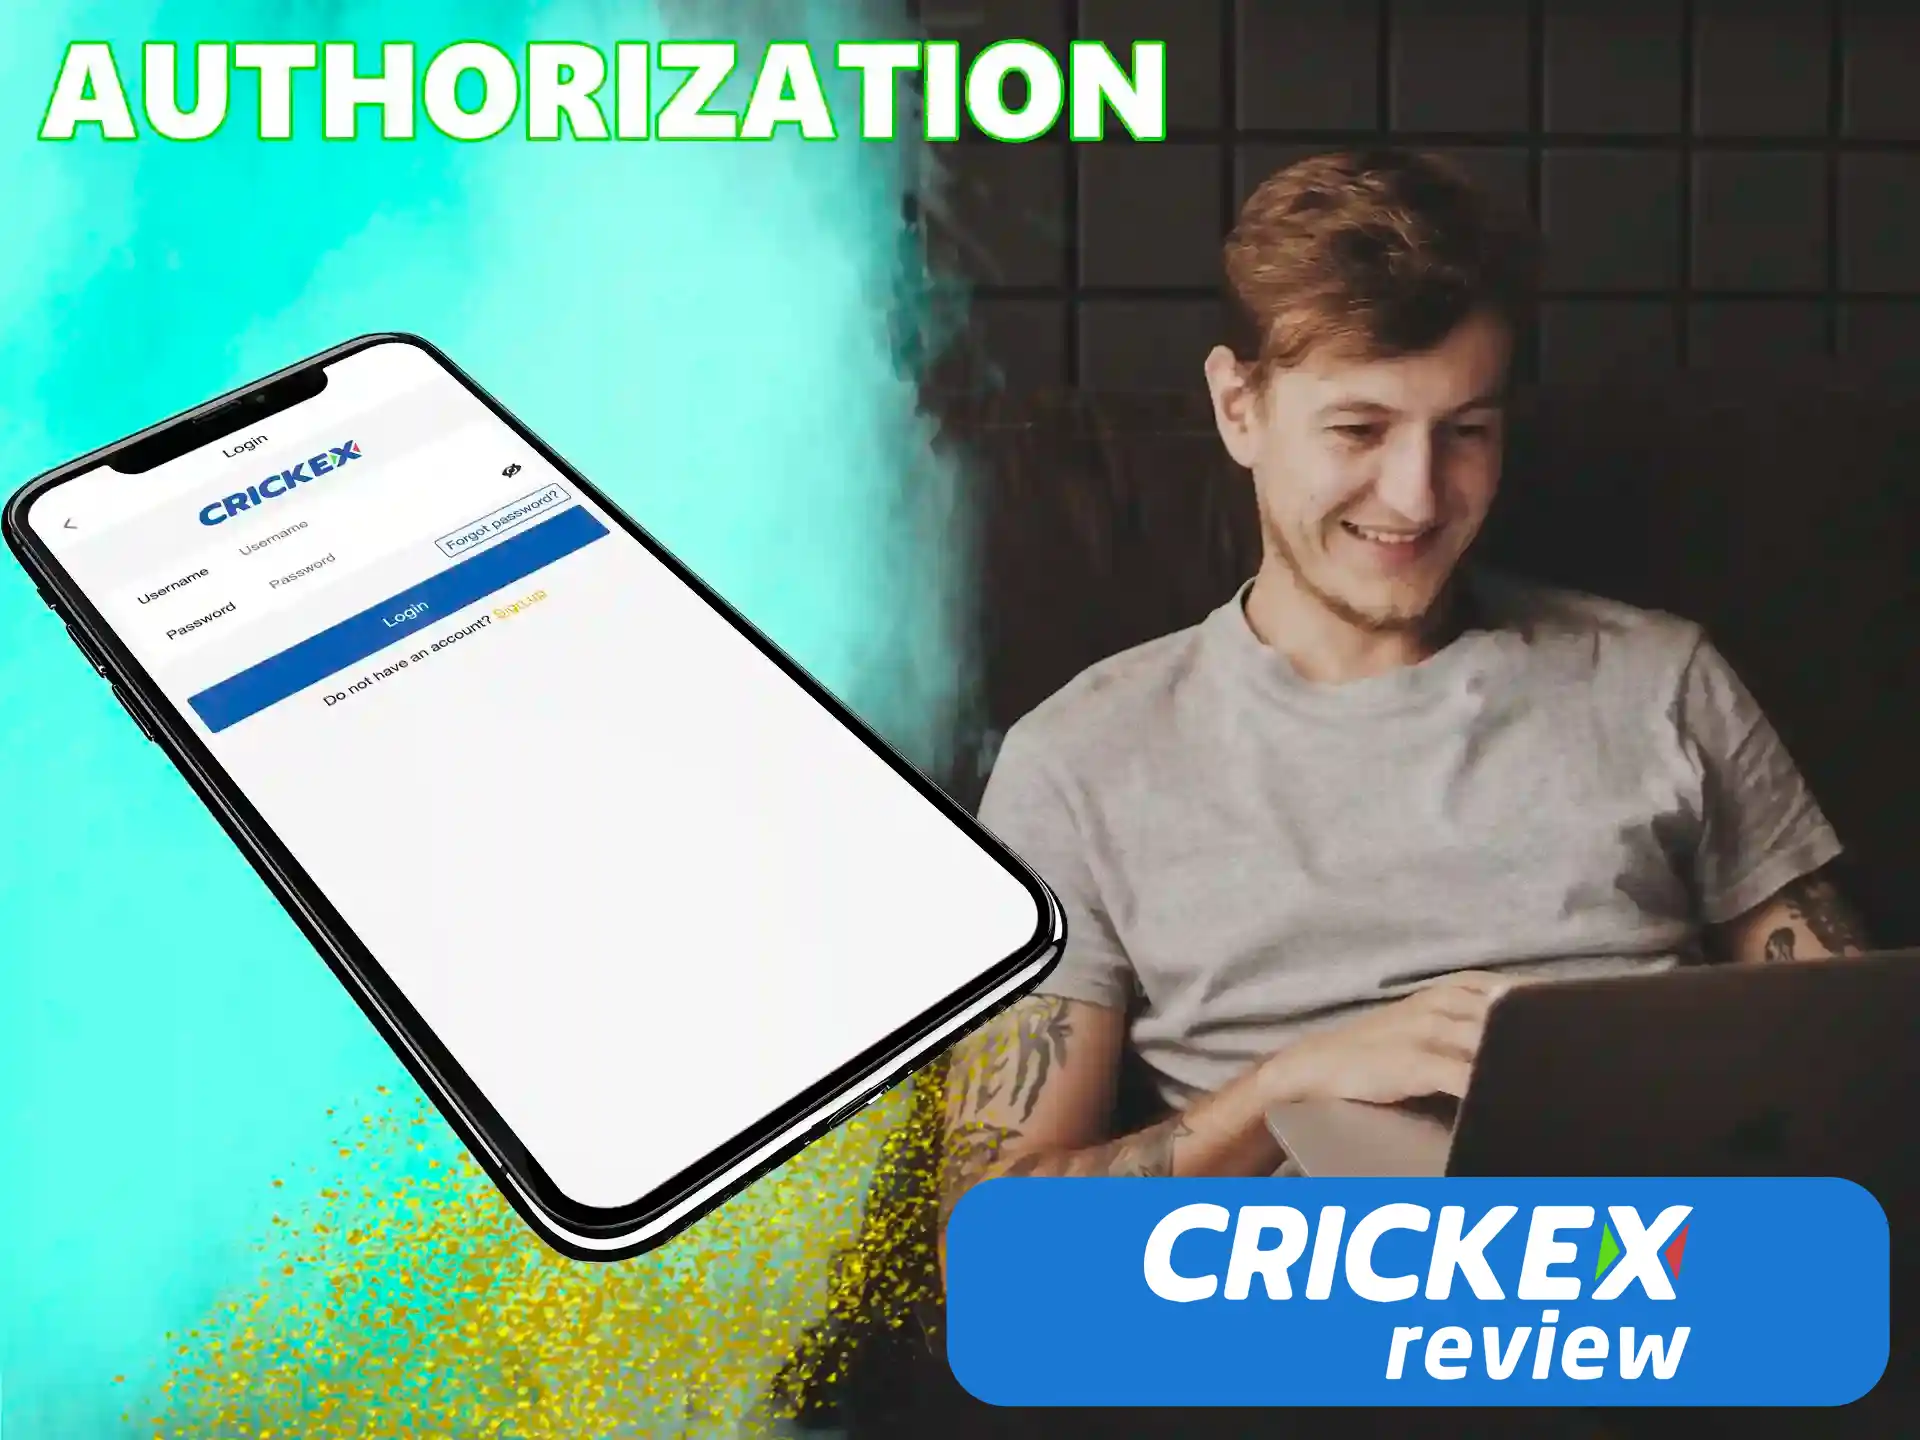 Log in to your Crickex account.